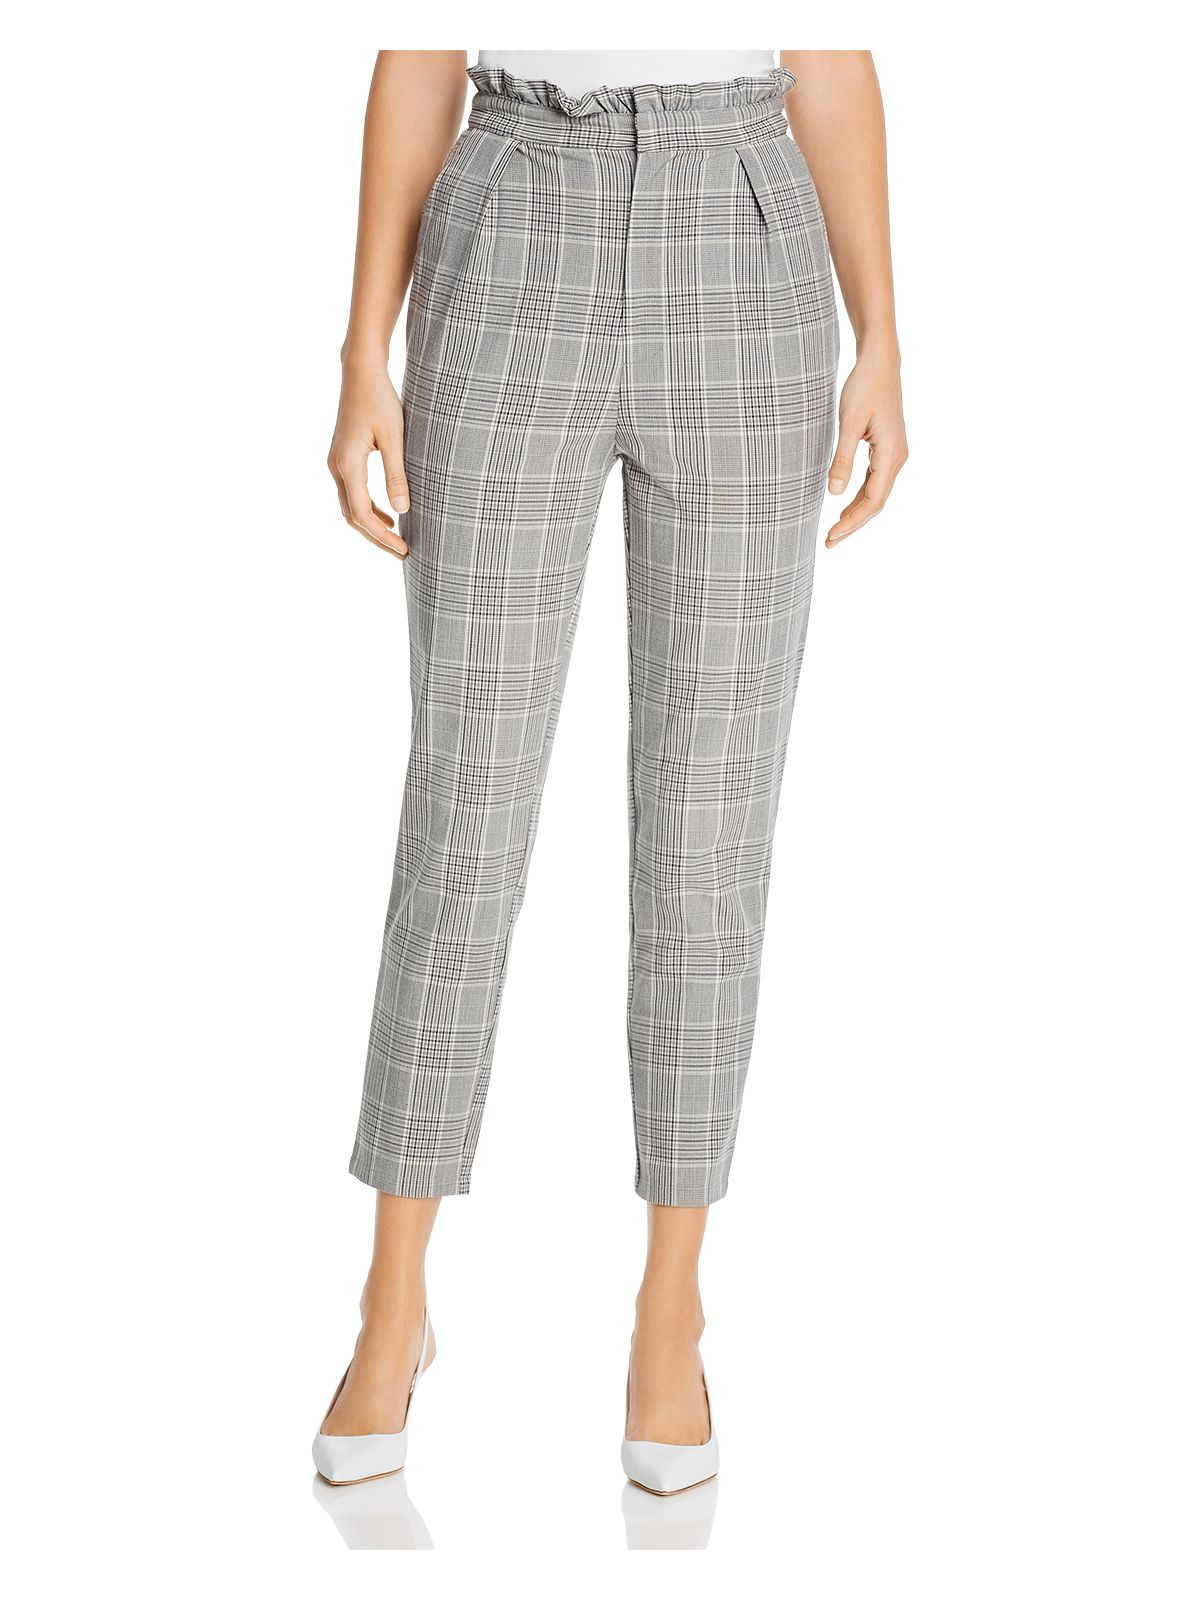 CUPCAKES AND CASHMERE Womens Gray Zippered Pocketed Pleated Paperbag Plaid Wear To Work High Waist Pants 2